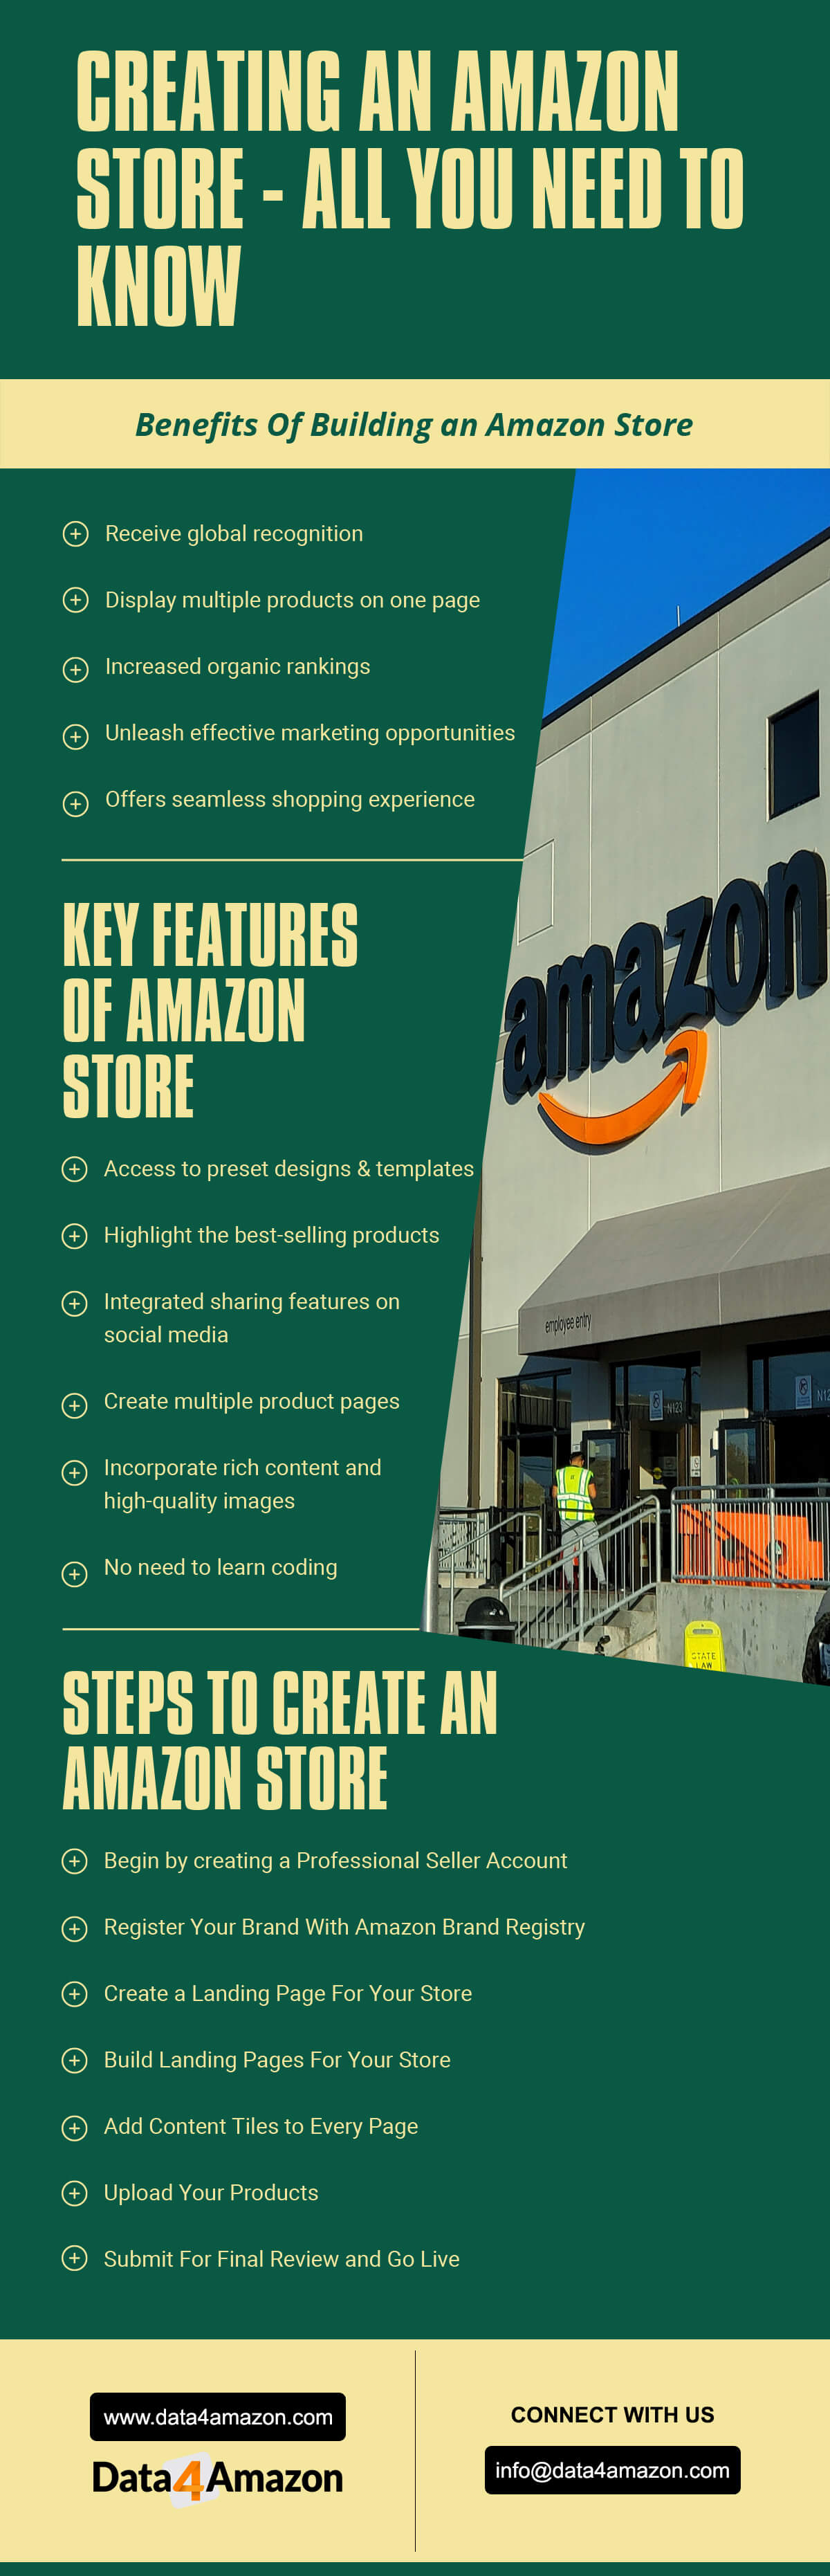 Building an Amazon Store